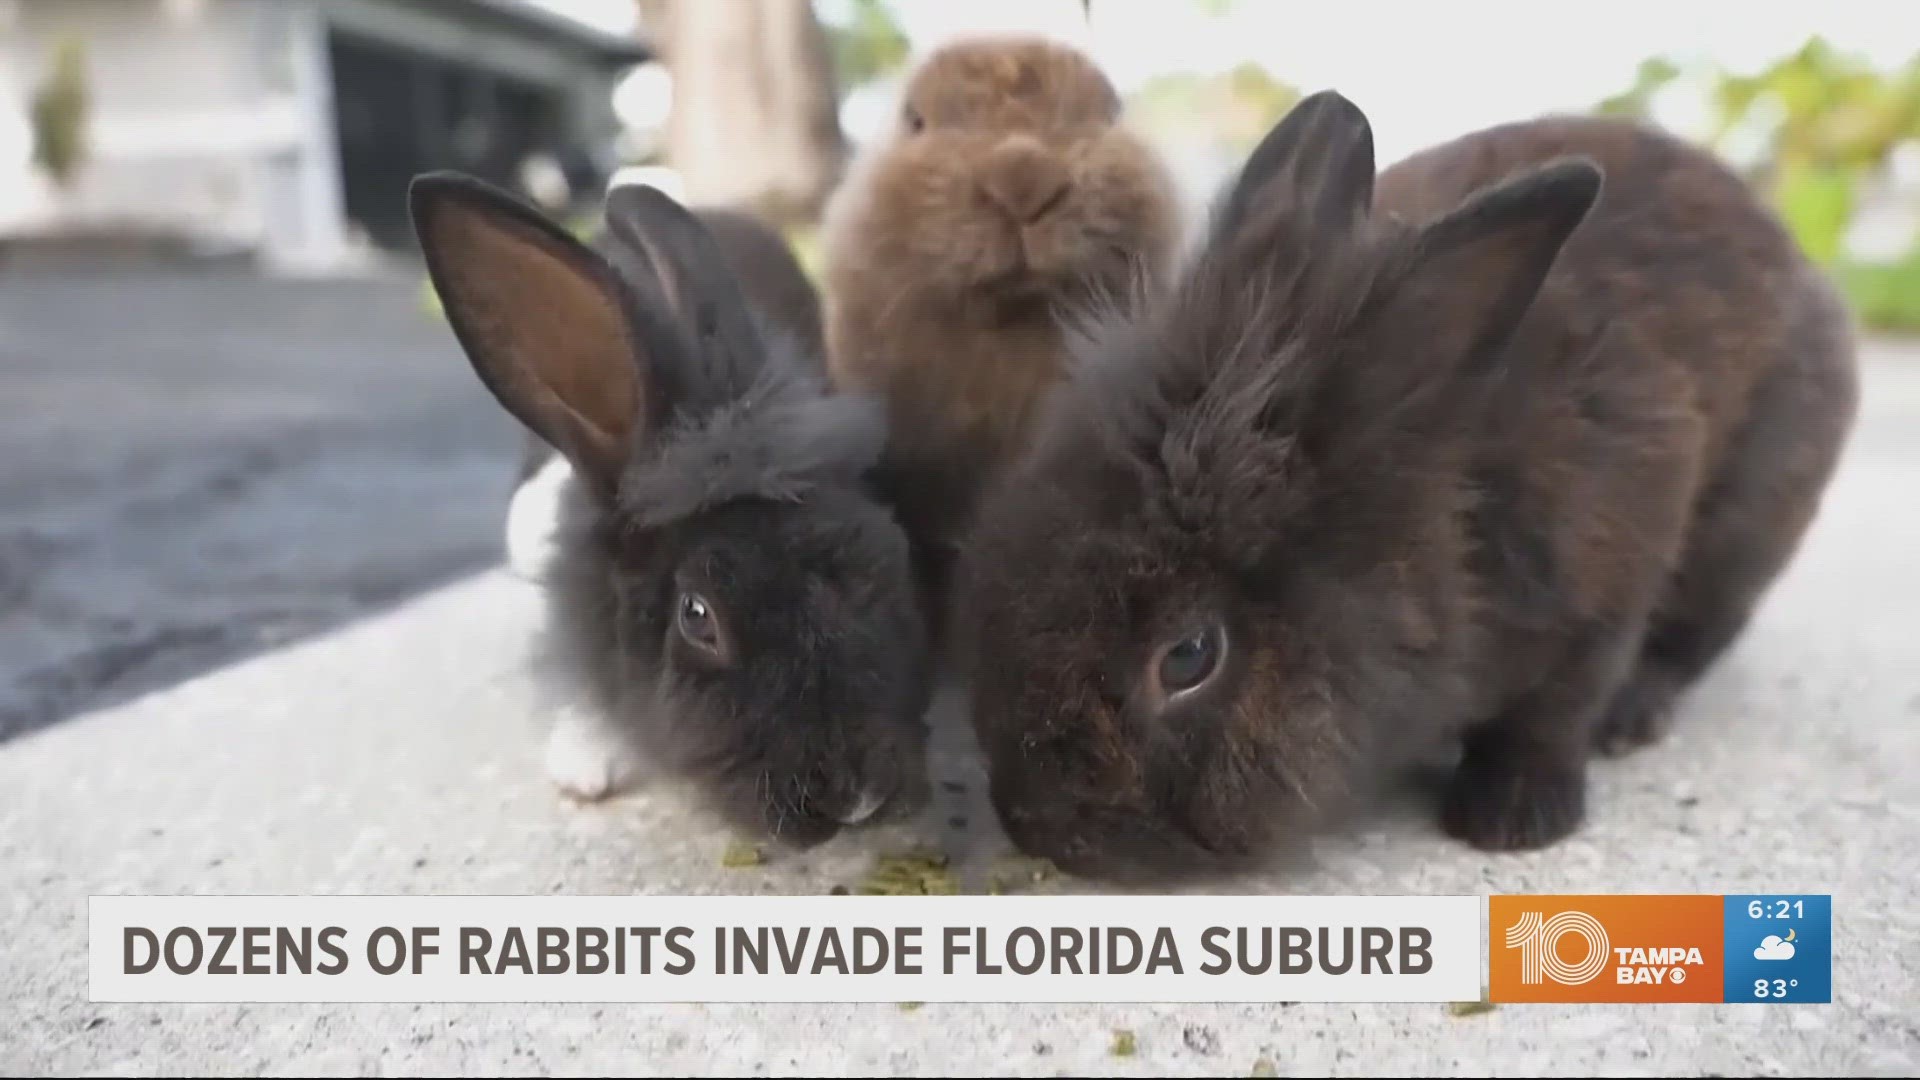 Residents are raising money to relocate the rabbits, which dig holes, chew wiring and aren't suited for the Florida outdoors.